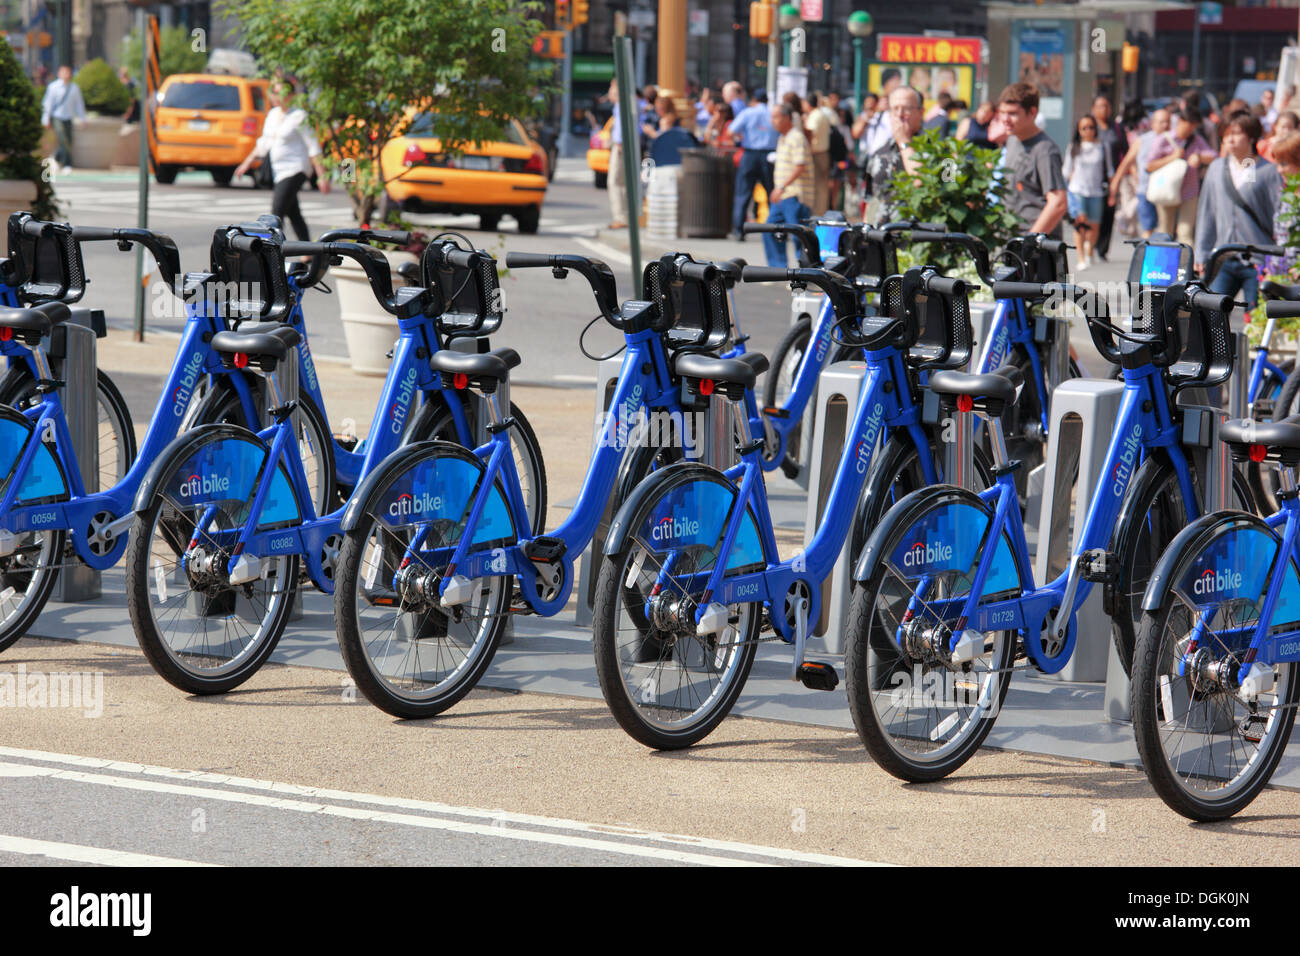 Citibike rental bicycles in New York, NY, USA Stock Photo